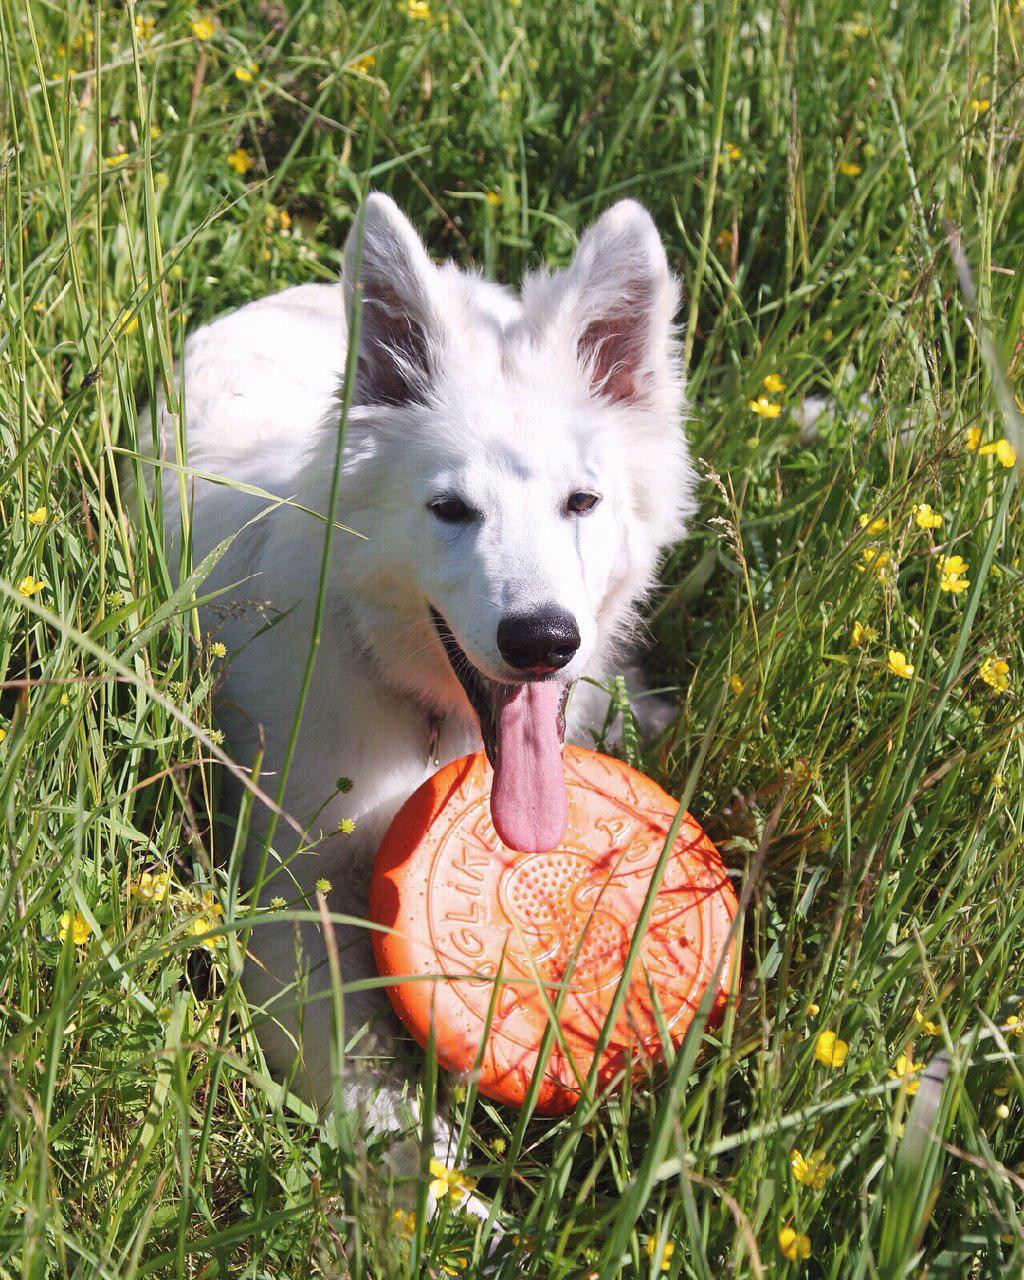 A Swiss Shepherd lying down in the field of grass with its frisbee